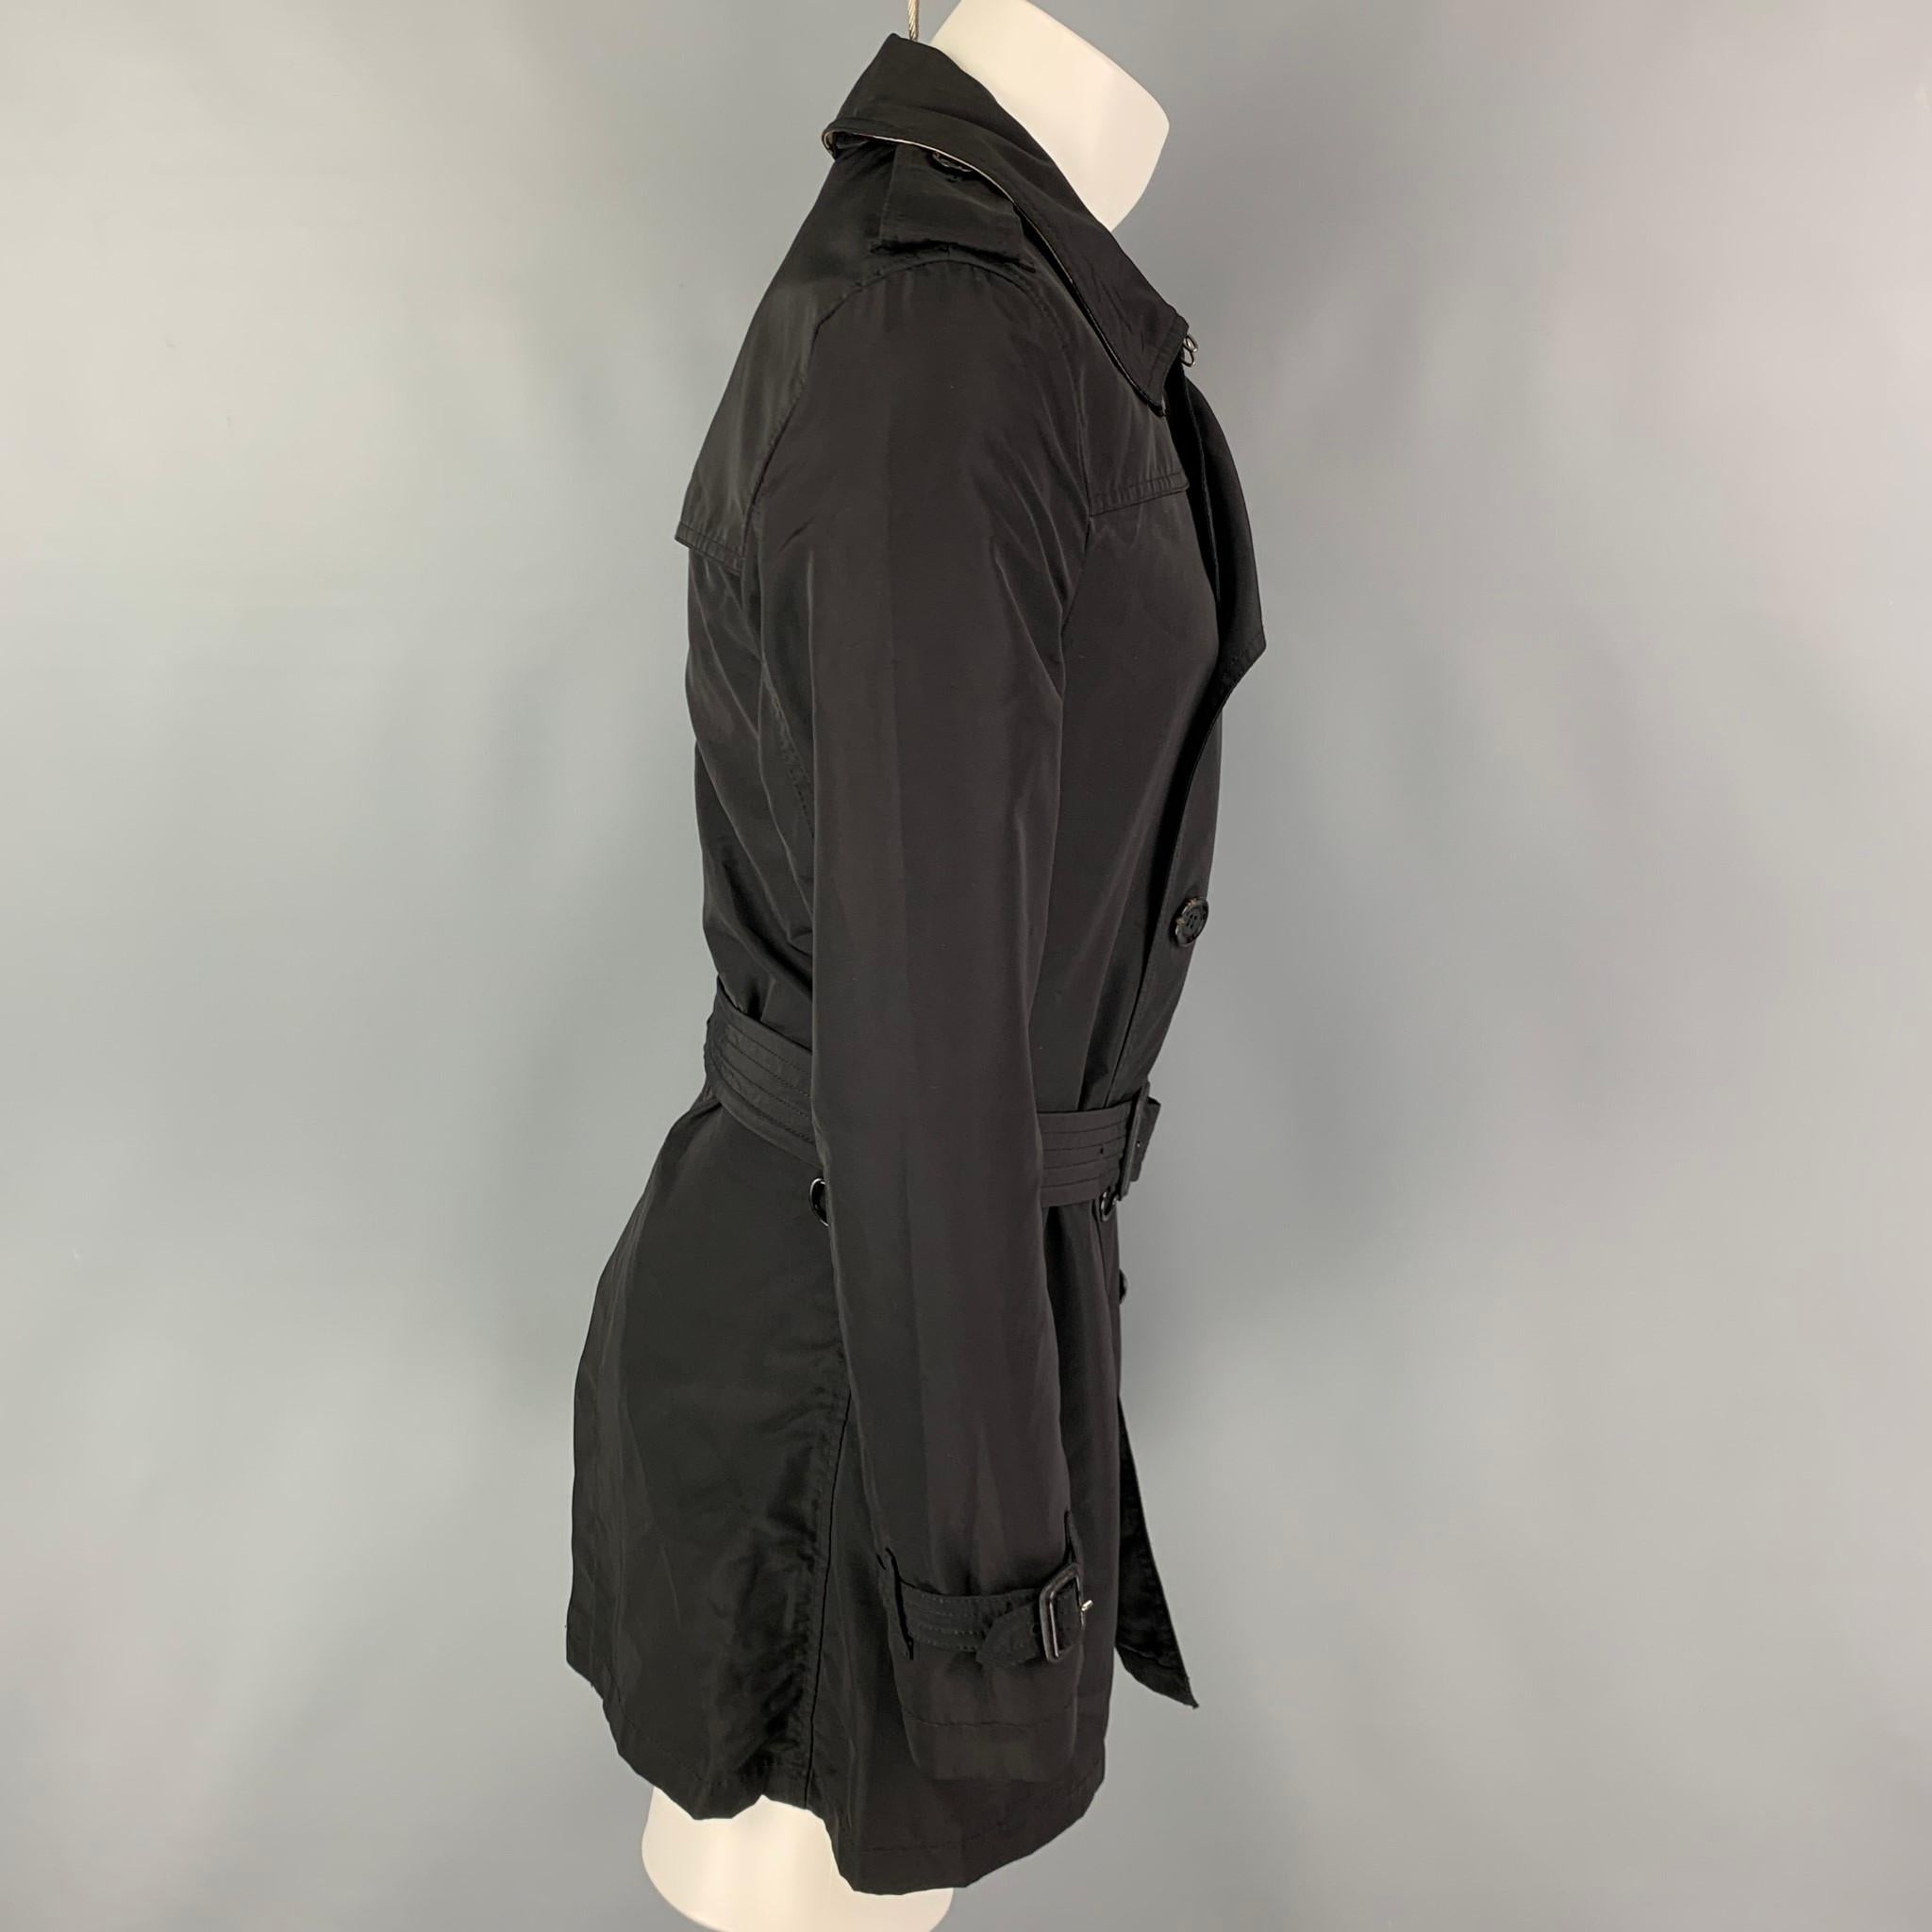 BURBERRY BRIT trench coat comes in a black nylon with a plaid interior featuring a belted style, epaulettes, front pockets, and a double breasted closure. 

Very Good Pre-Owned Condition.
Marked: S

Measurements:

Shoulder: 17 in.
Chest: 36